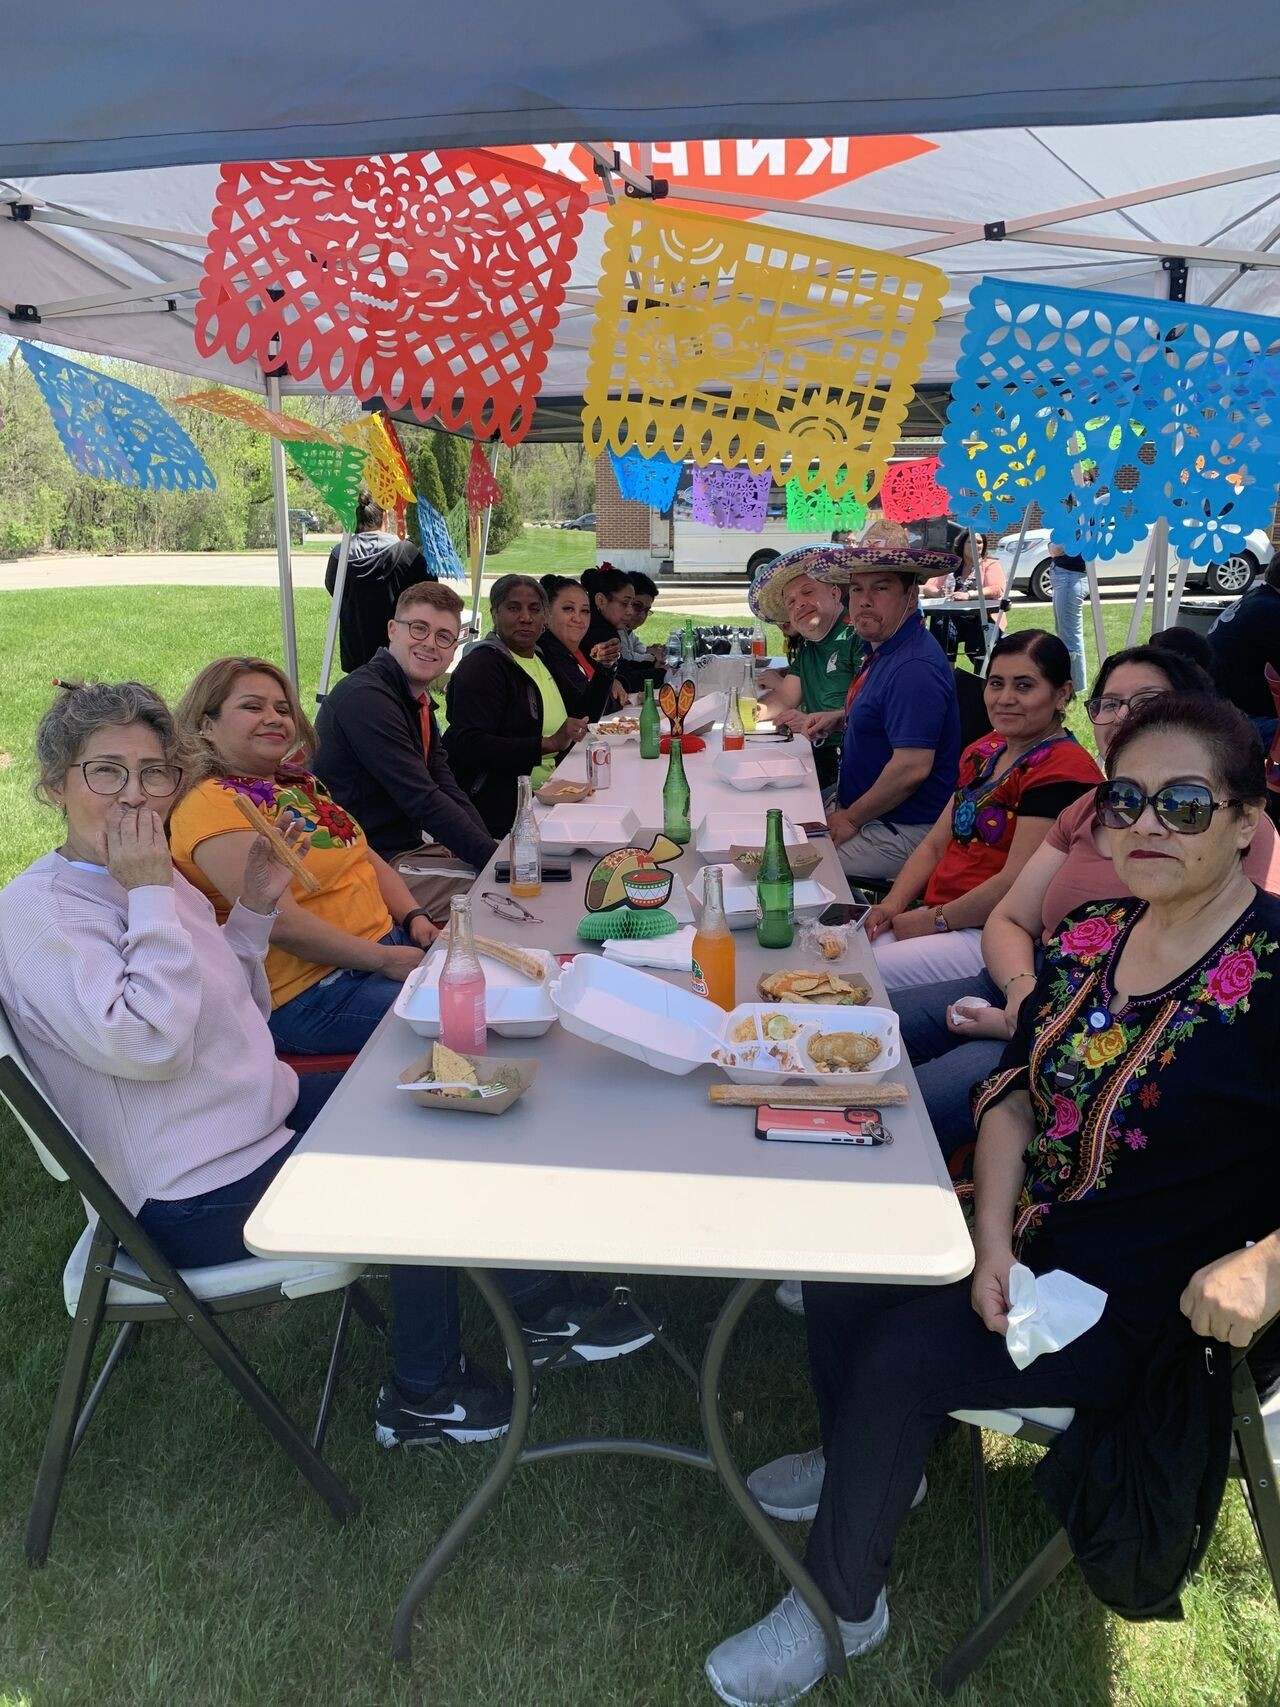 At KTLP, we celebrate Cinco de Mayo with a food truck and fun outdoor activities.